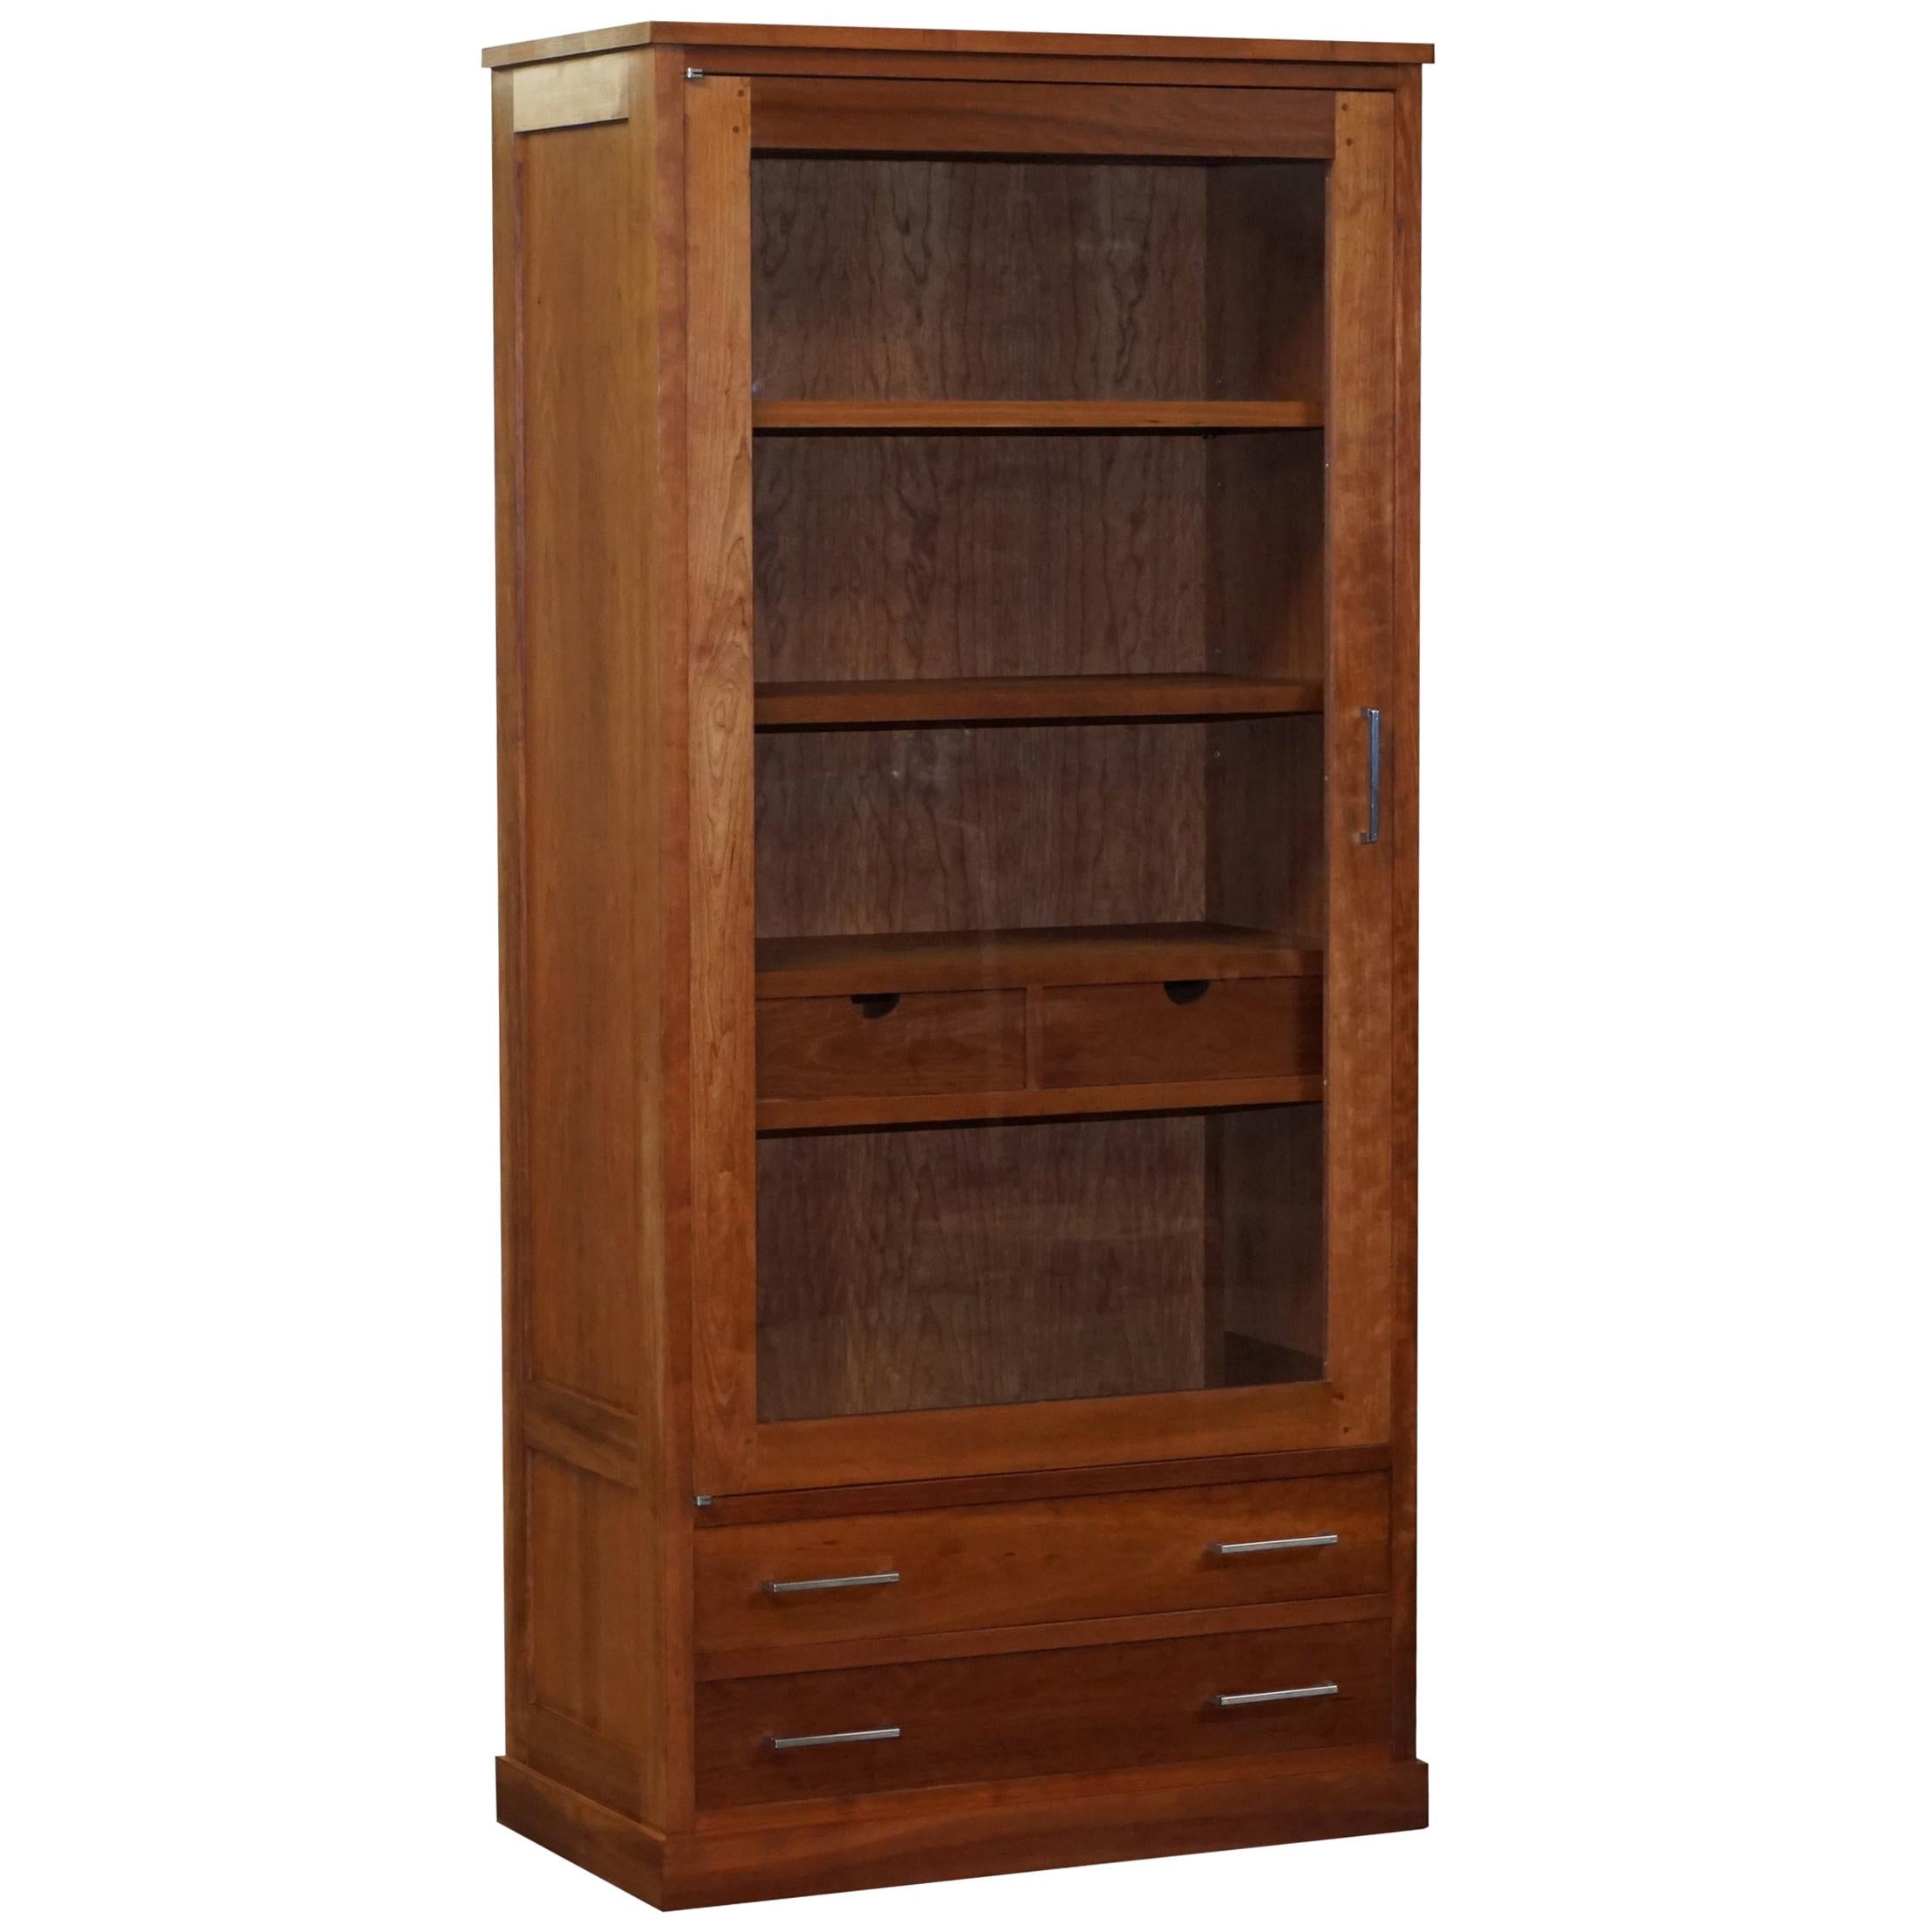 SOLID AMERICAN BLACK CHERRY WOOD HAND MADE IN ITALY RIVA 1920 BOOKCASE CUPBOARd